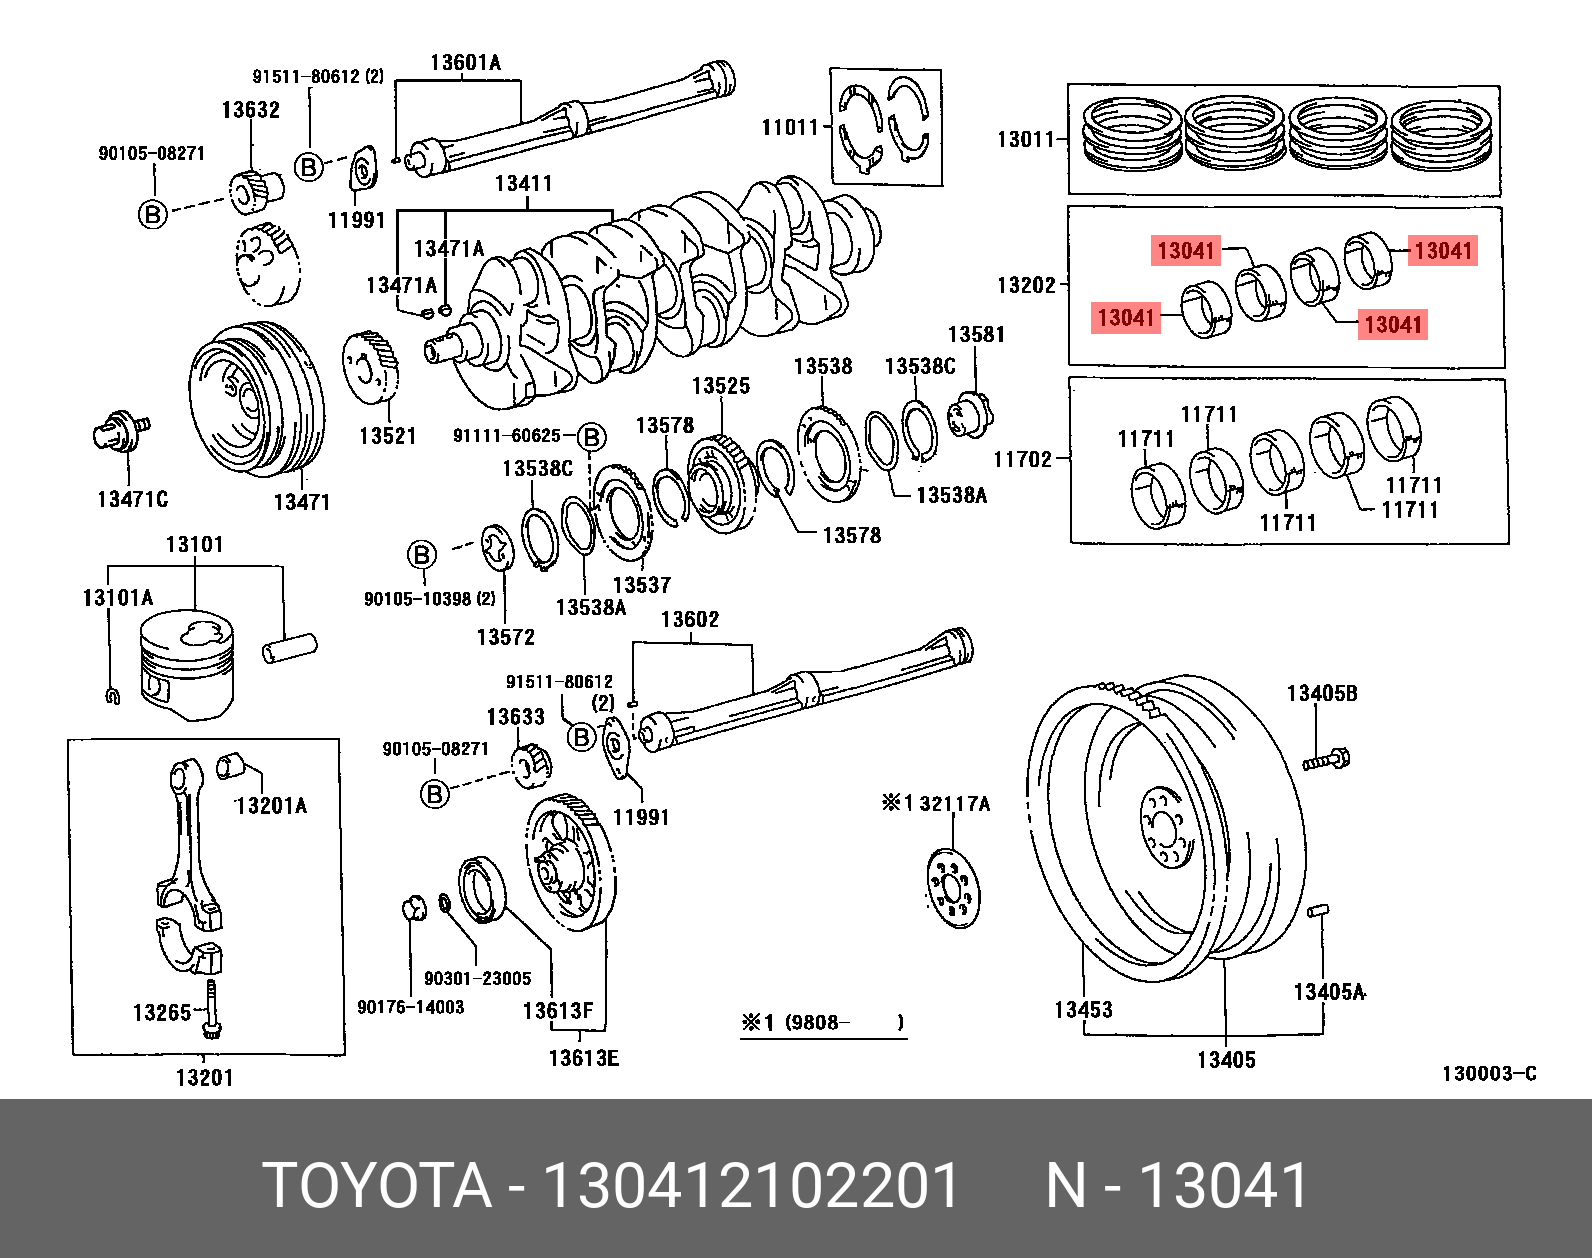 WILL CYPHA 200209 - 200507, BEARING, CONNECTING ROD